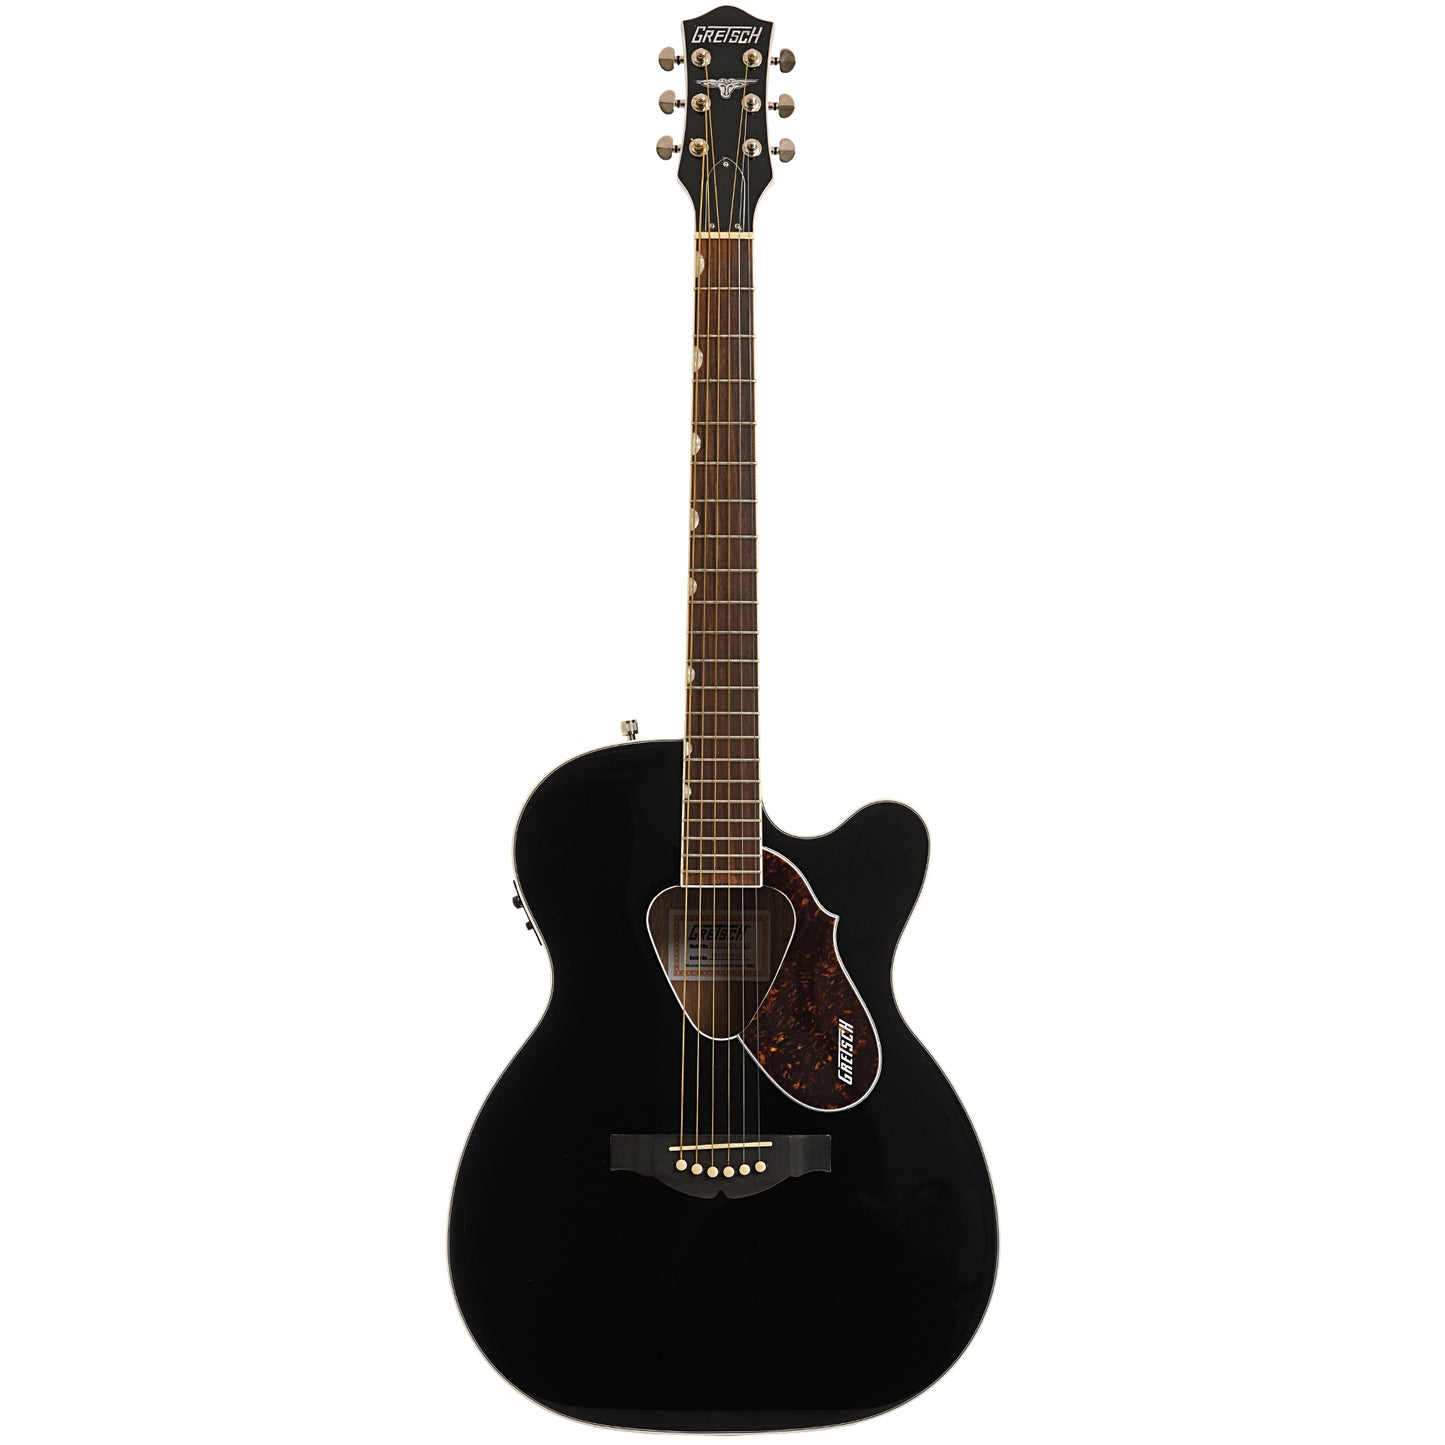 Full front of Gretsch G-5013CE Rancher Jr. Acoustic Electric